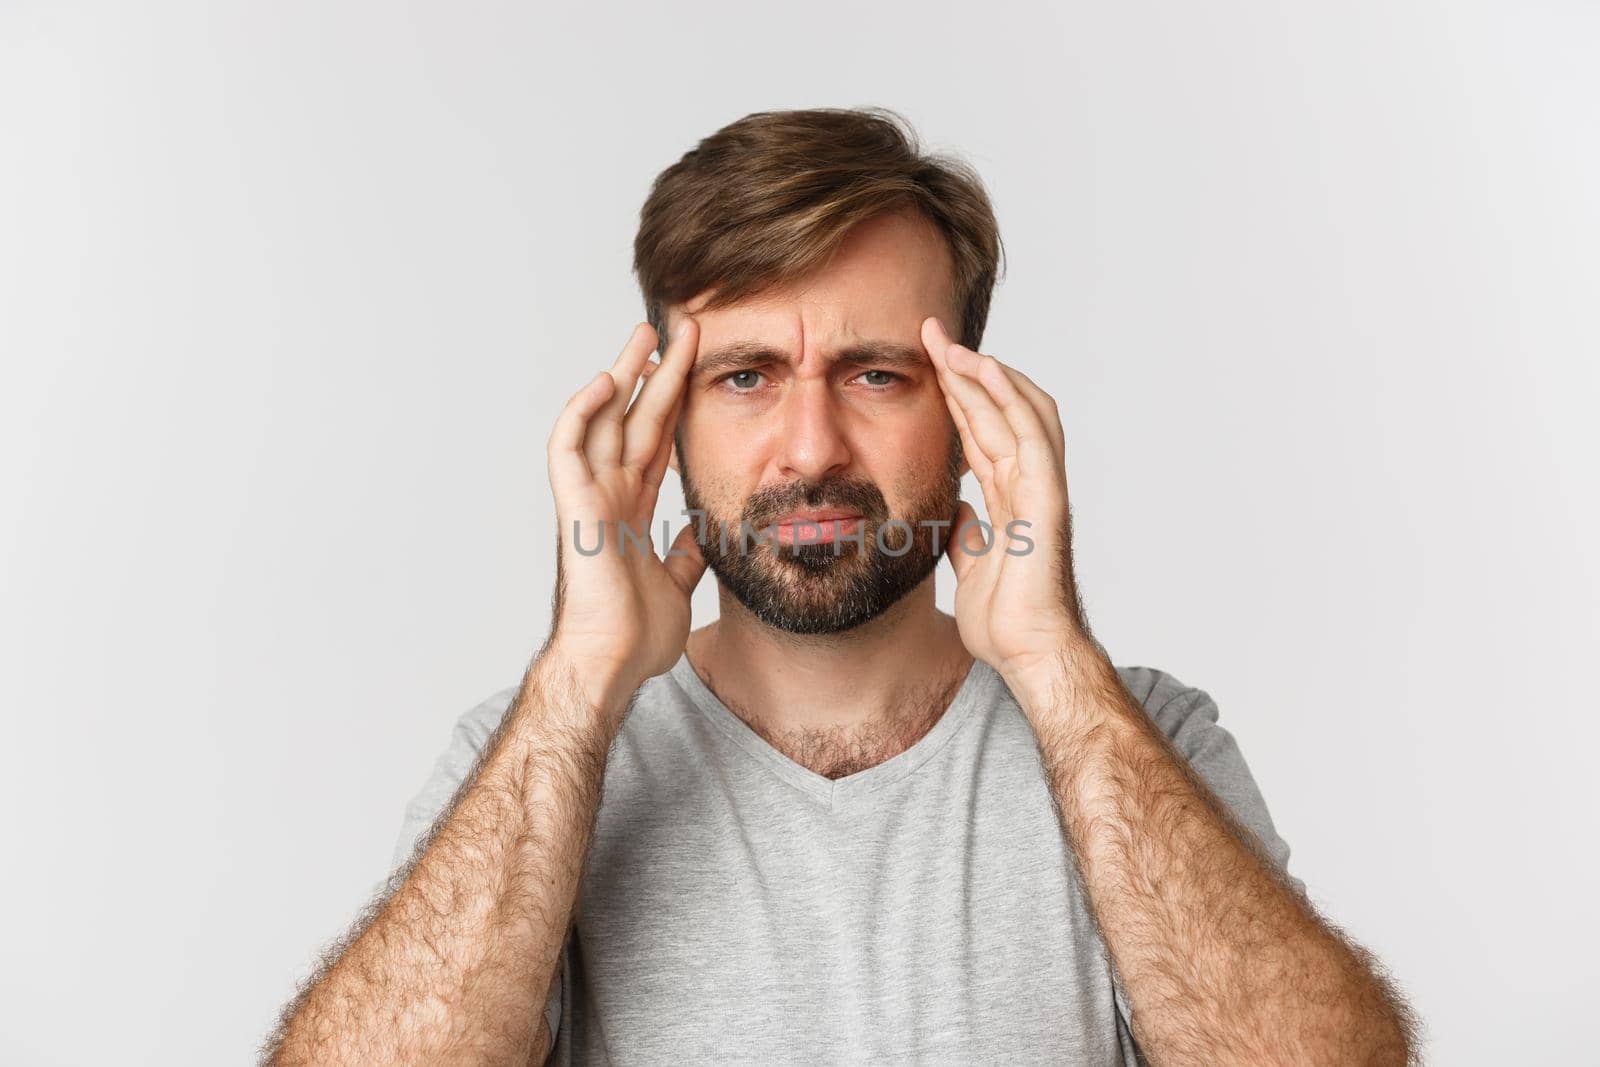 Close-up of gloomy bearded man, touching head and grimacing, having a headache or migraine, standing over white background.